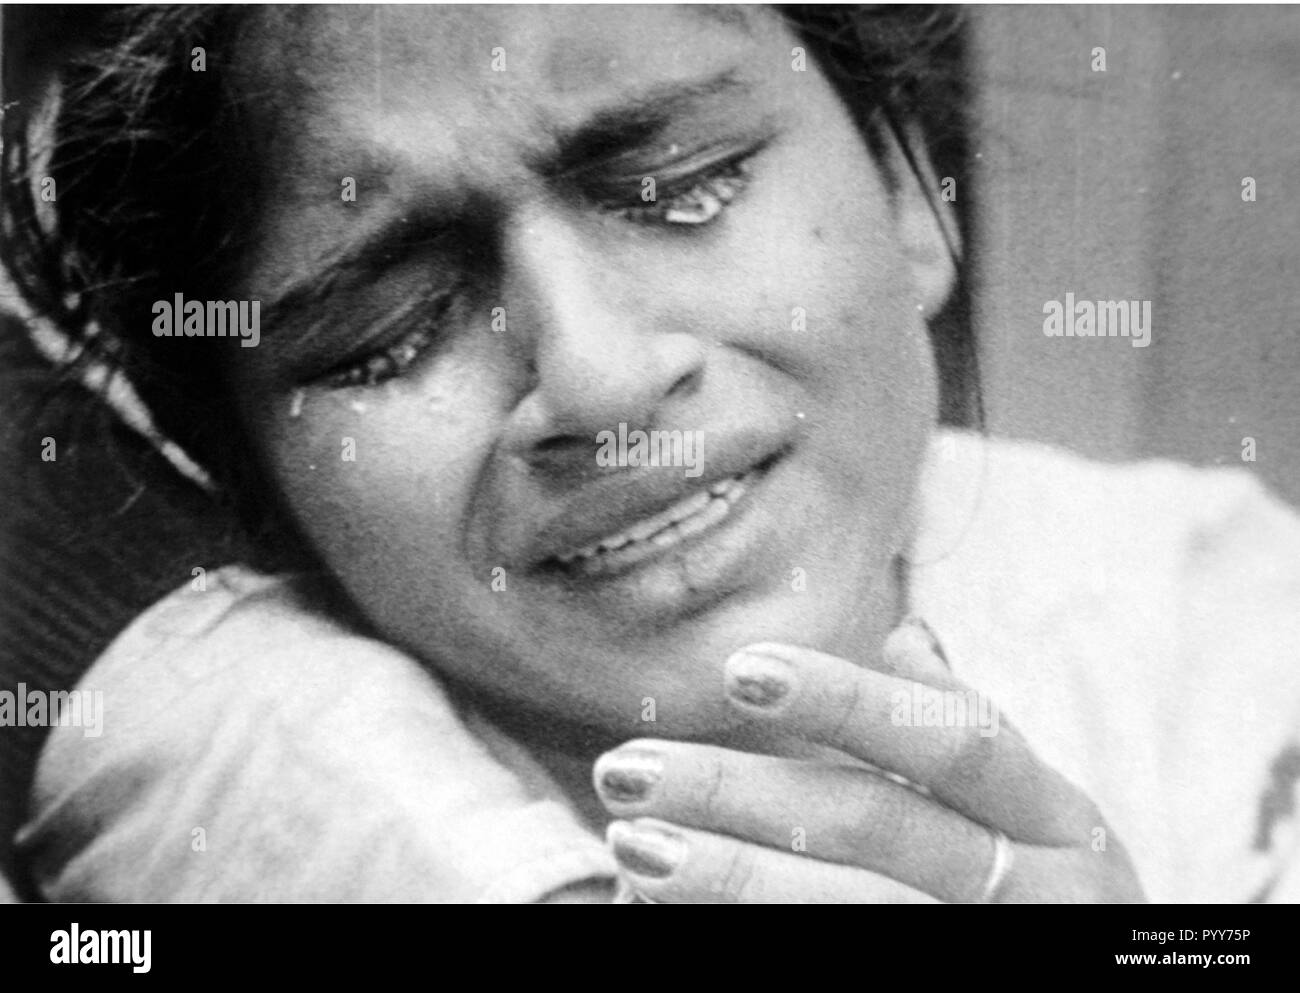 Woman crying, Union Carbide gas leak tragedy, Bhopal, Madhya Pradesh, India, Asia, Bhopal disaster, Bhopal gas tragedy, 1984, old vintage 1900s picture Stock Photo